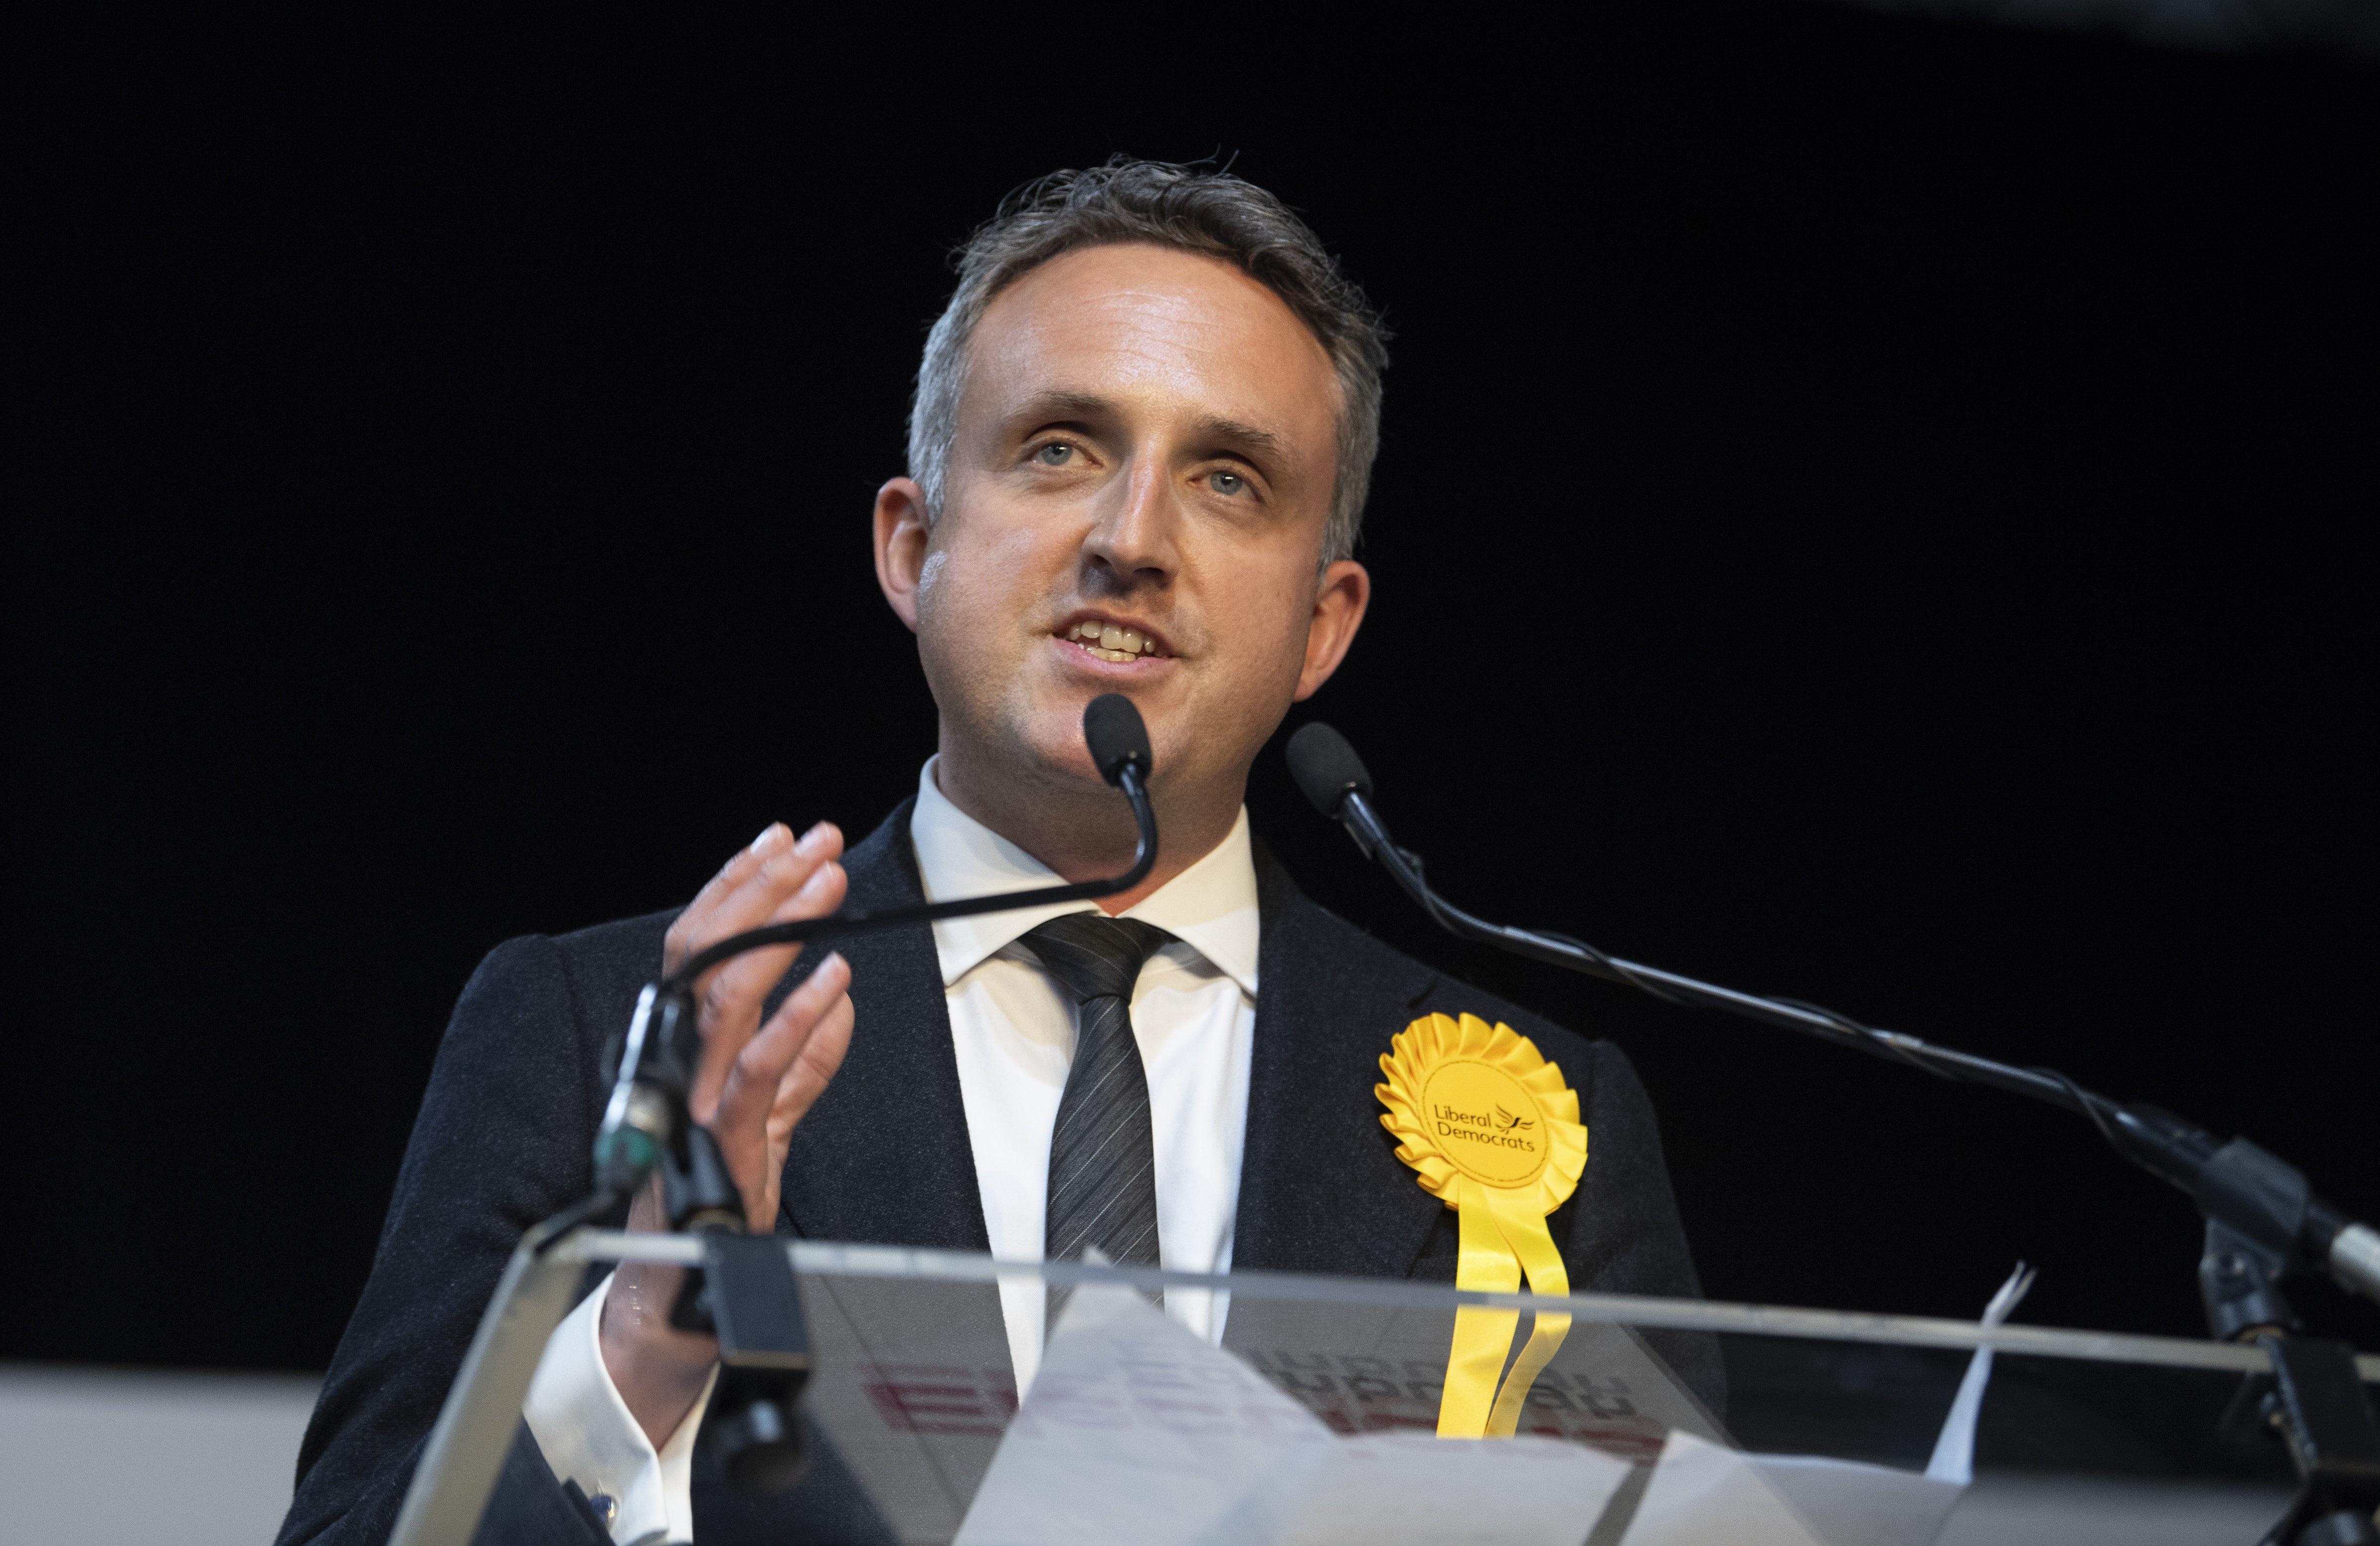 Alex Cole-Hamilton called for a ‘proper’ funding package (Lesley Martin/PA)